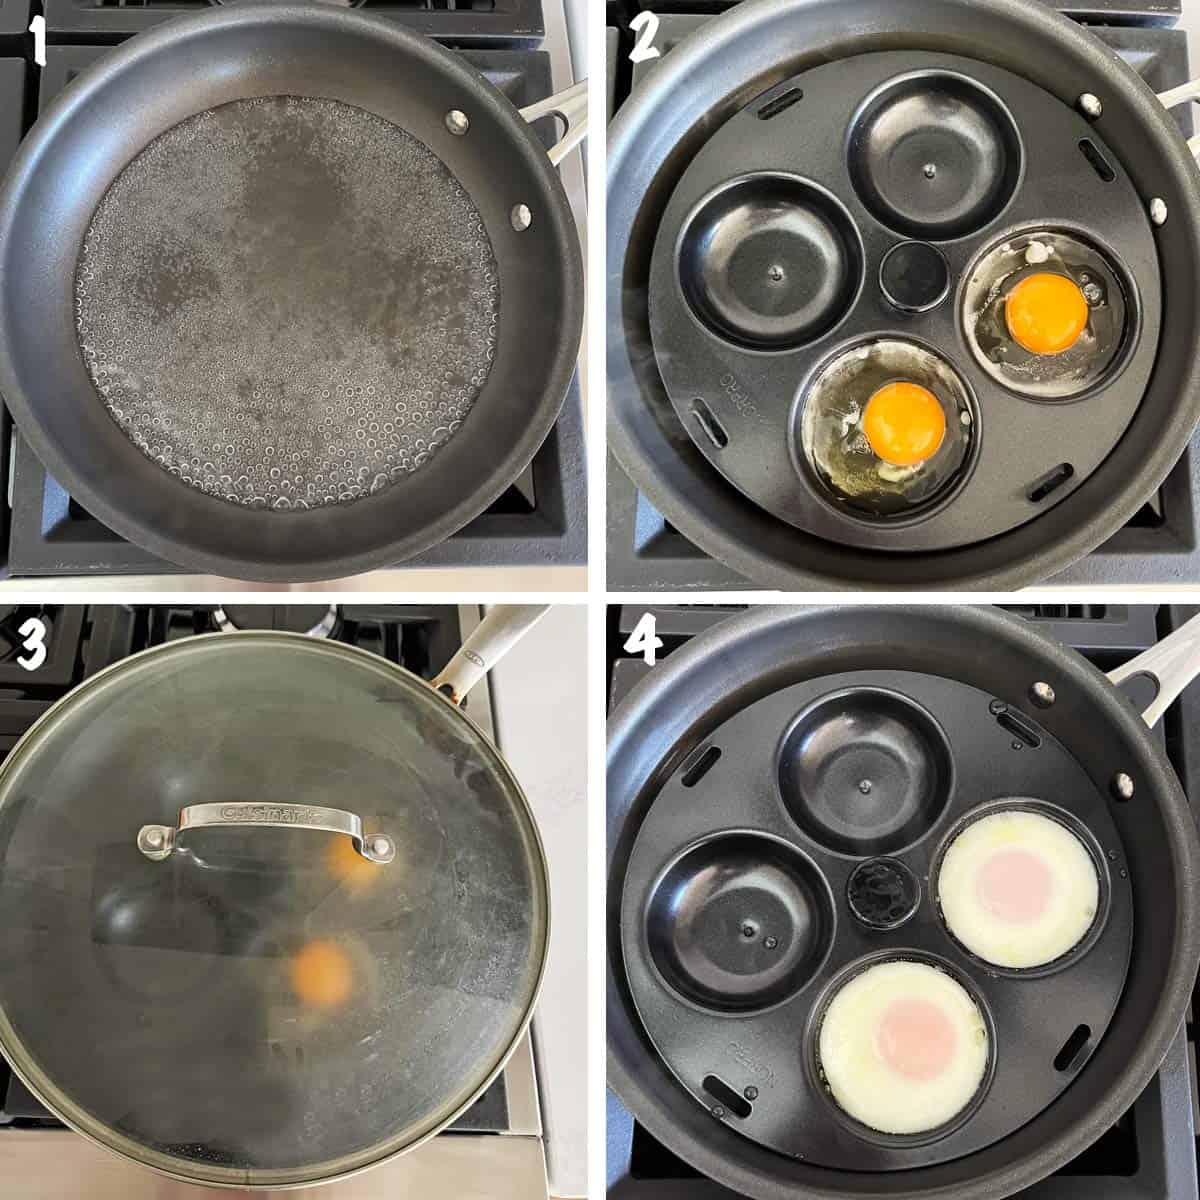 A four-photo collage showing the steps for poaching eggs using a stovetop poacher.